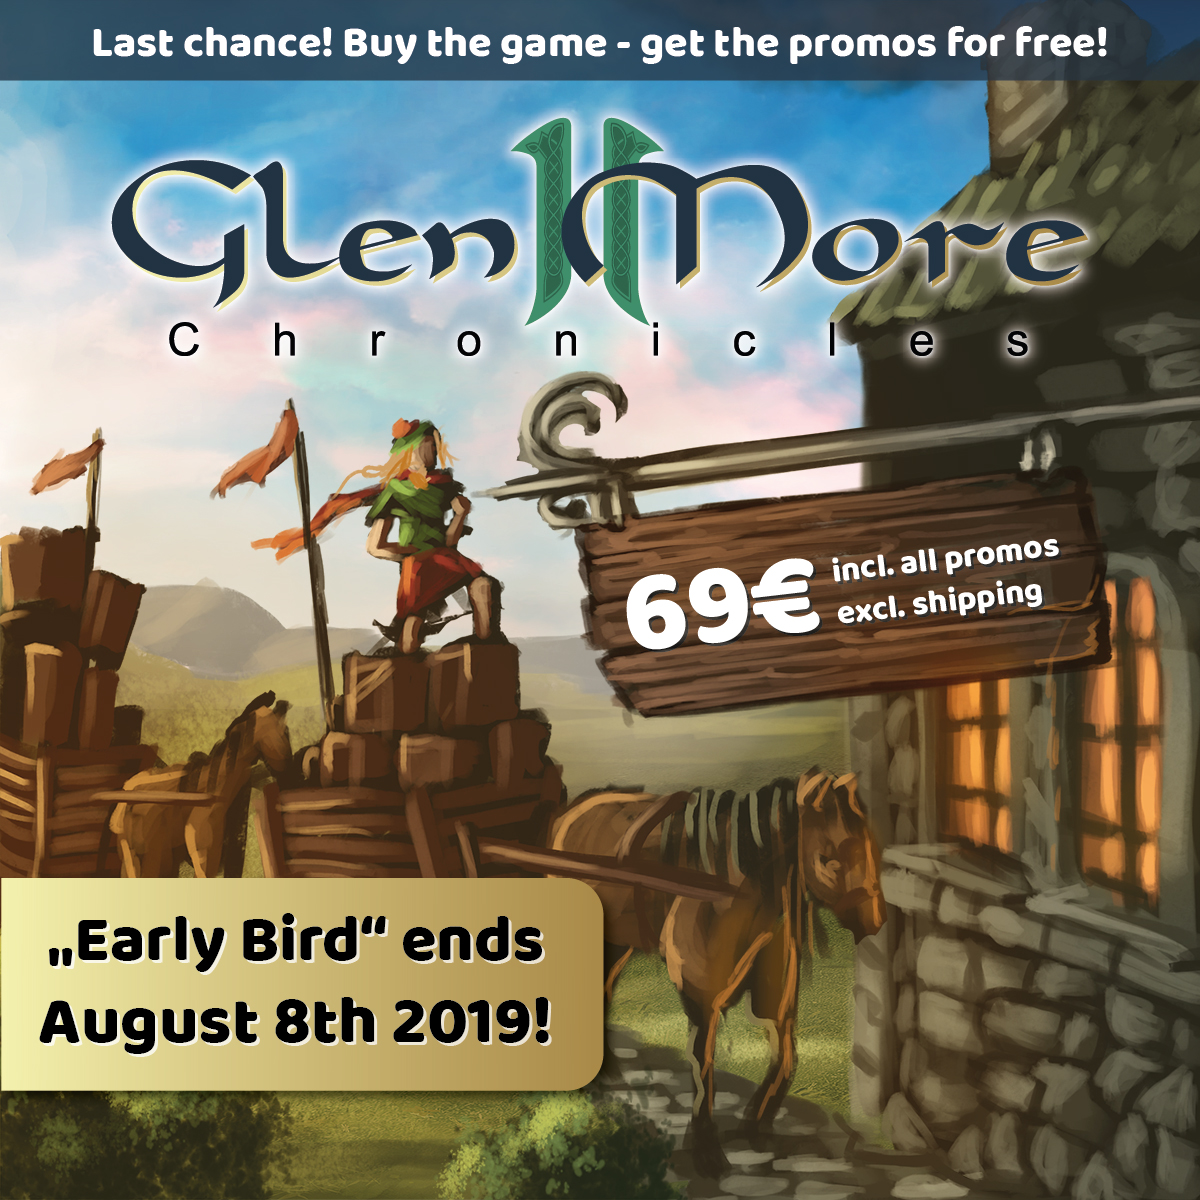 „Glen More II Chronicles“ on the Early Bird offer!